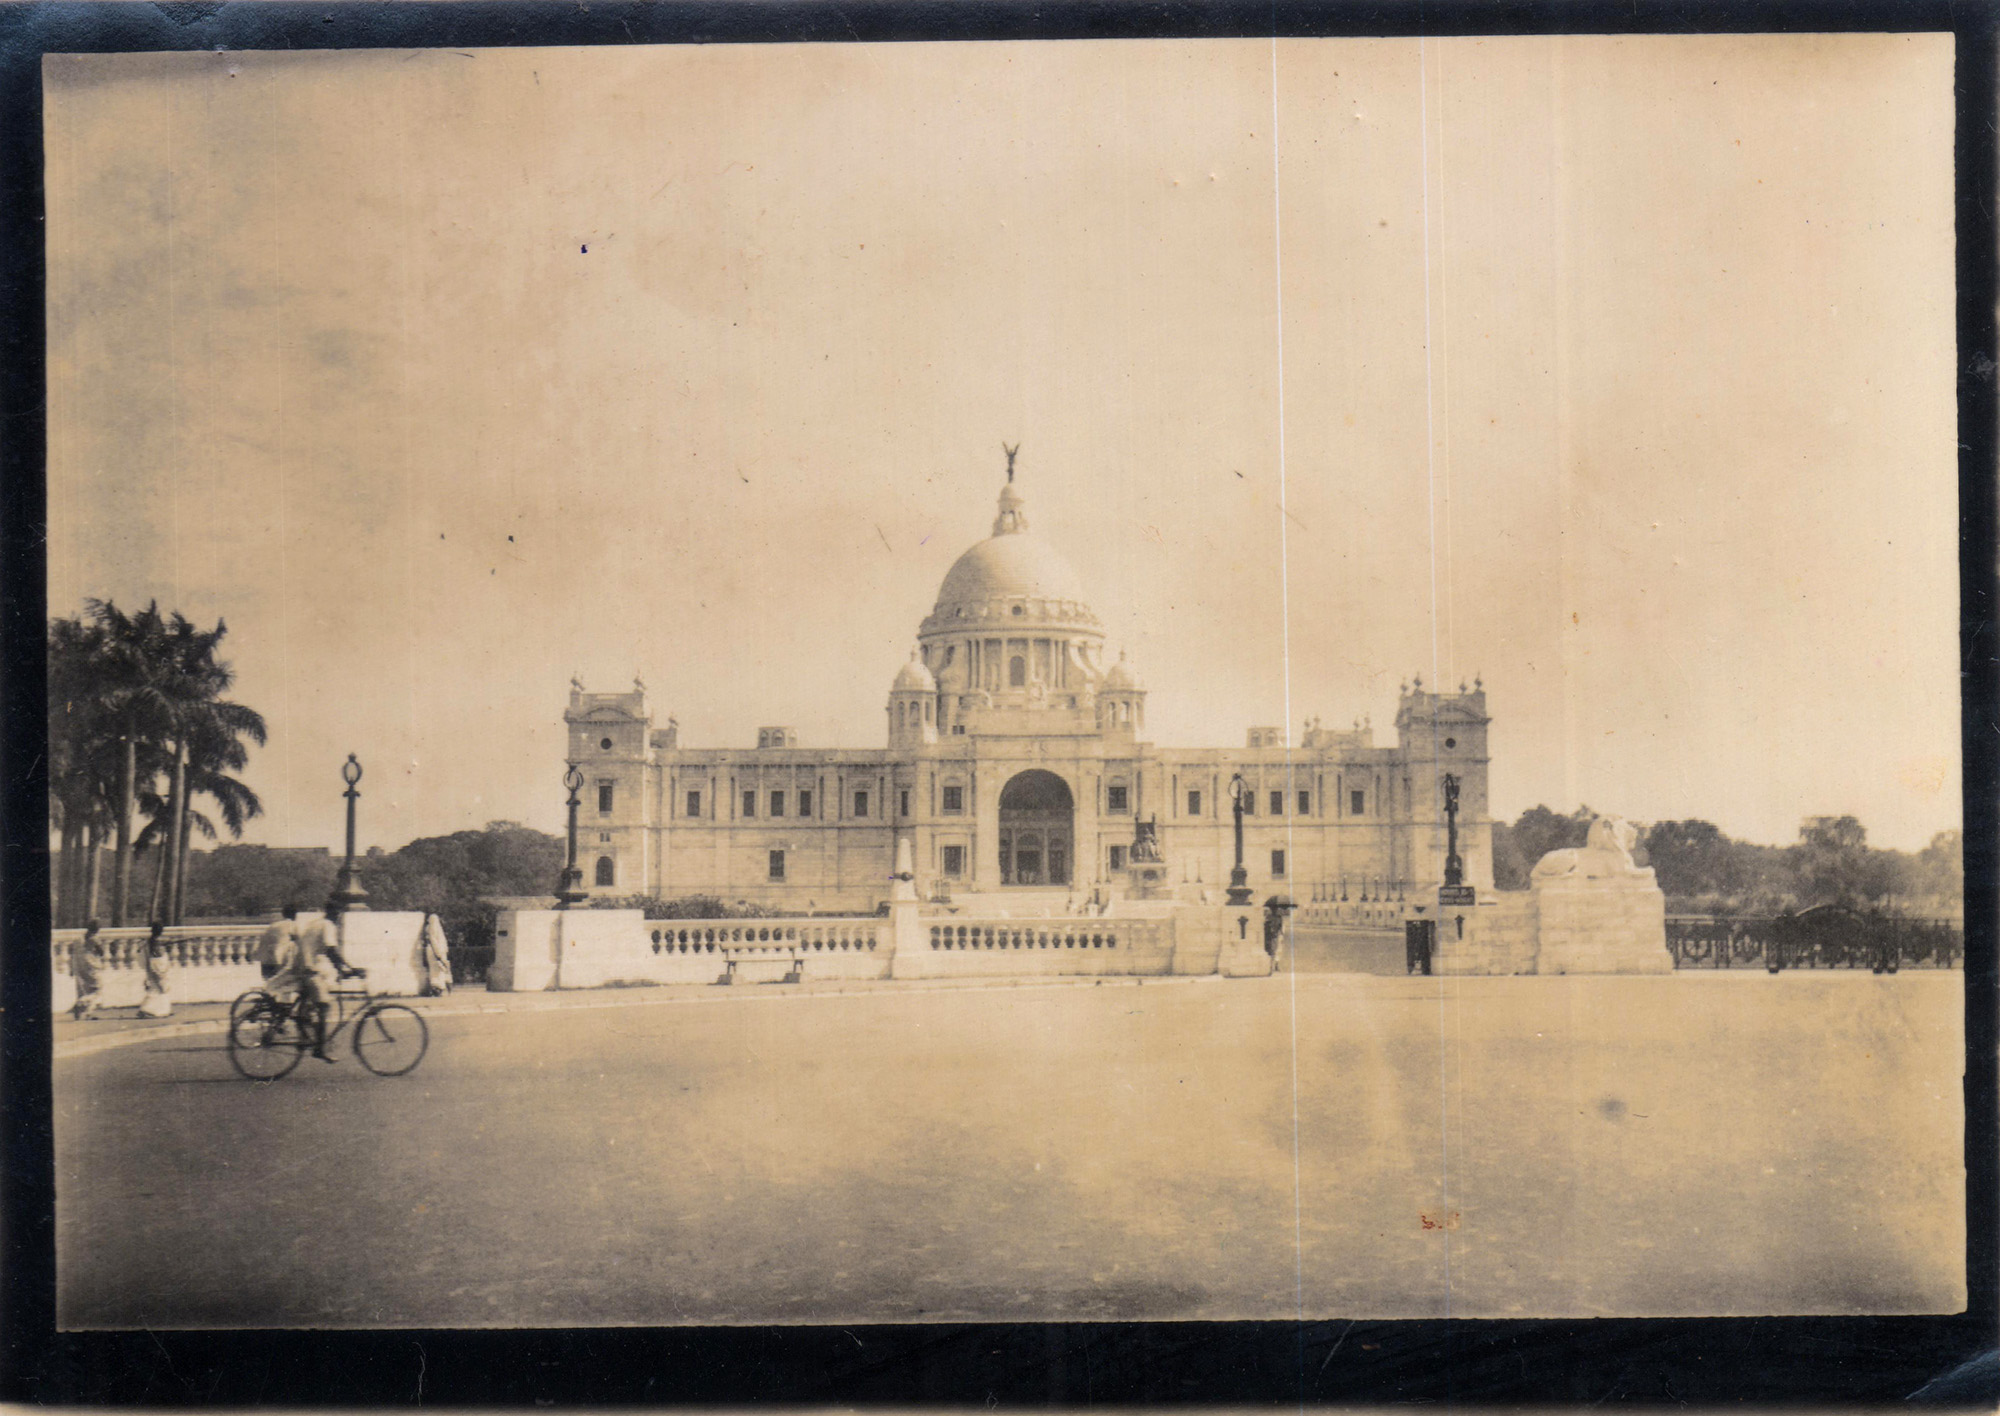 Victoria Memorial in Kolkata, a large marble building, pictured in the 1950s [Courtesy: Moti Sing Srimal]